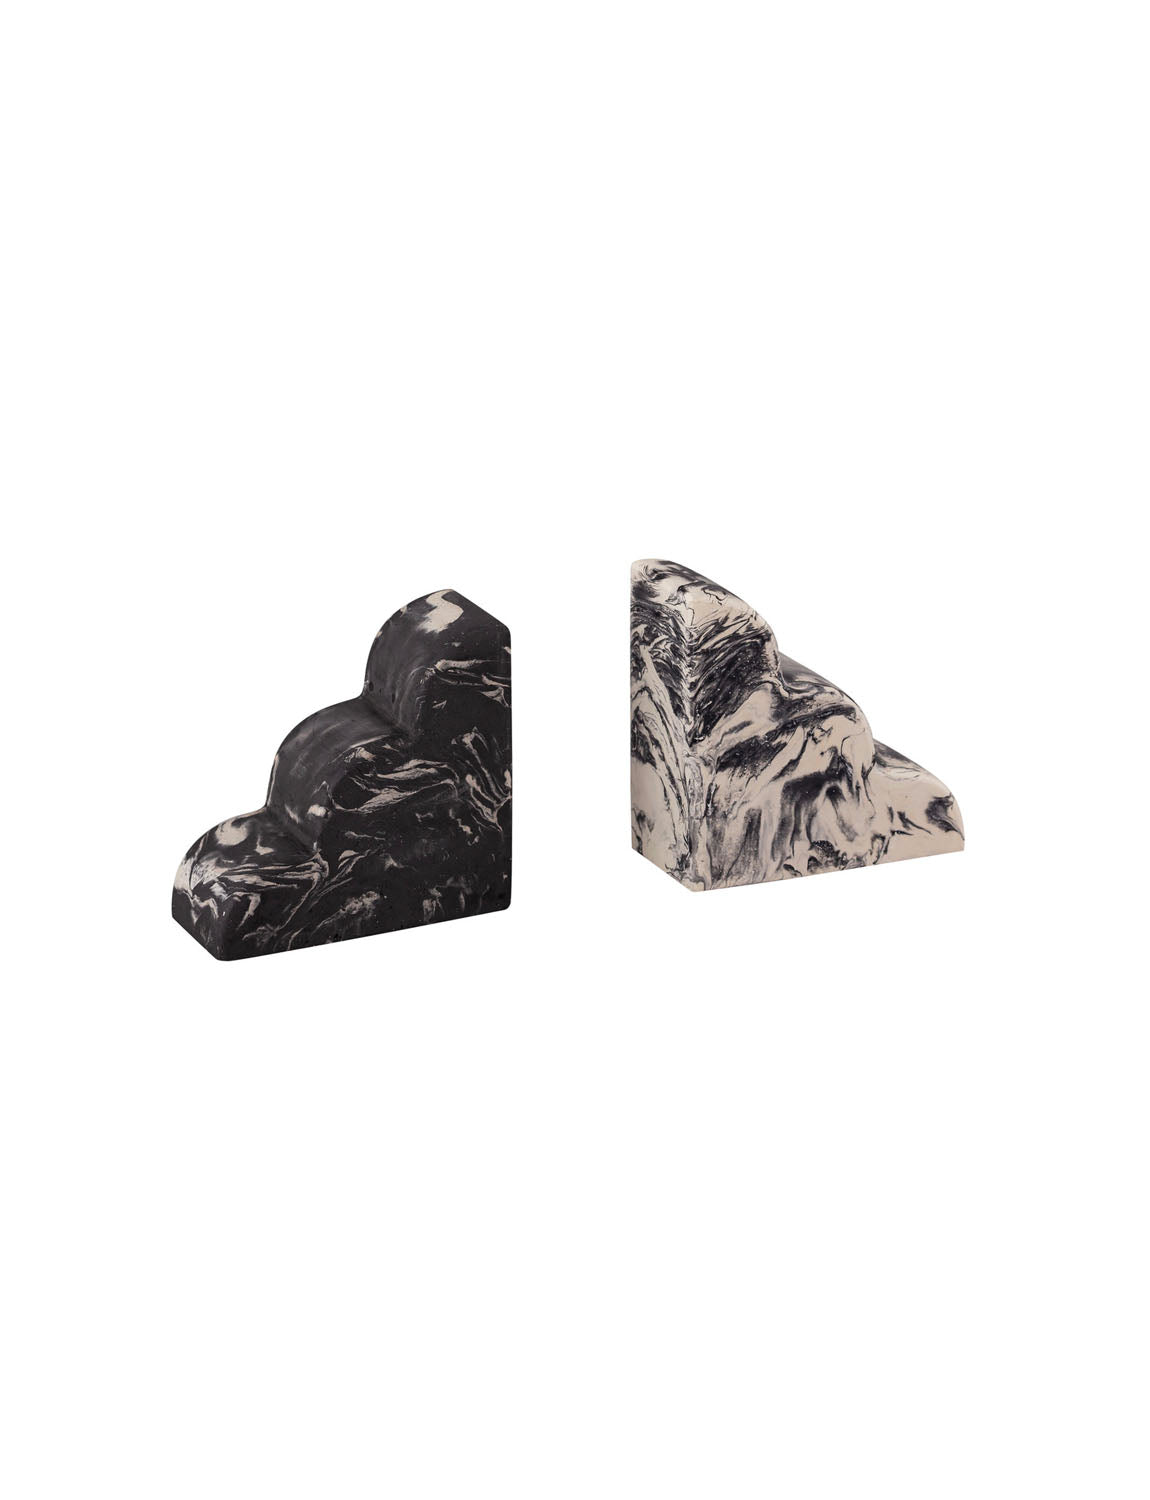 Cloud Marble Bookends